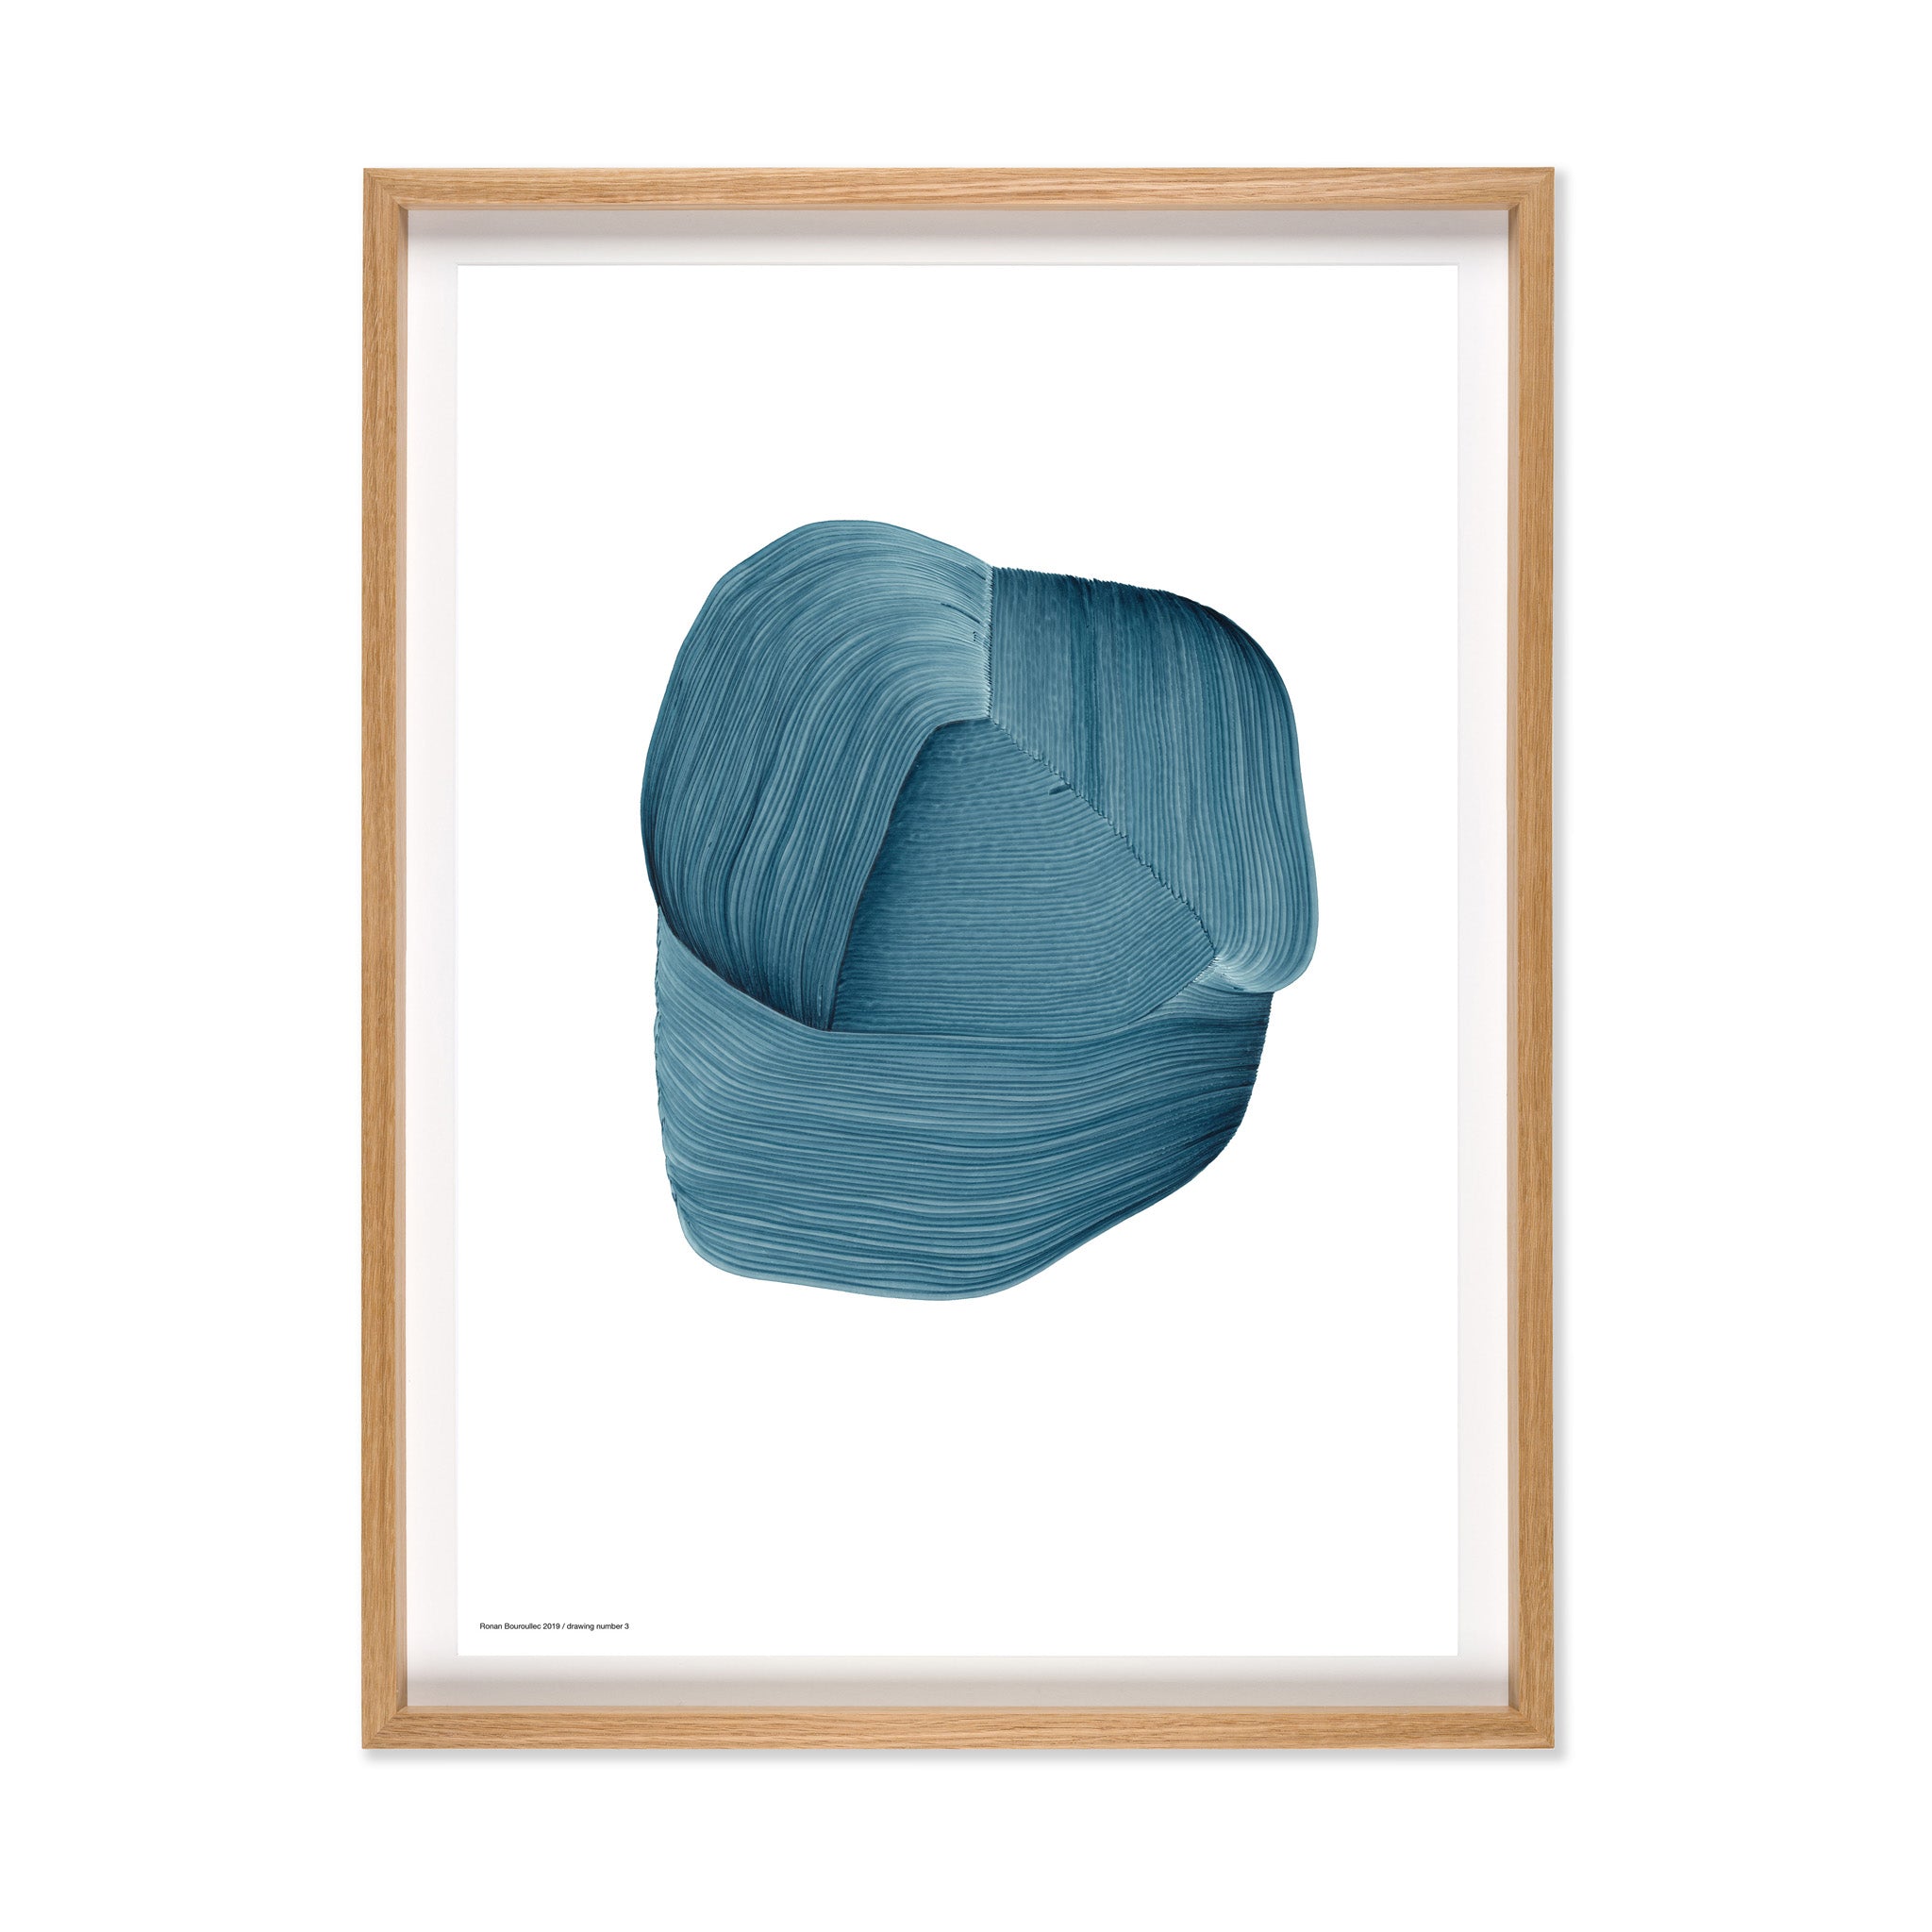 Ronan Bouroullec: Drawing 3, 2020 Framed Poster